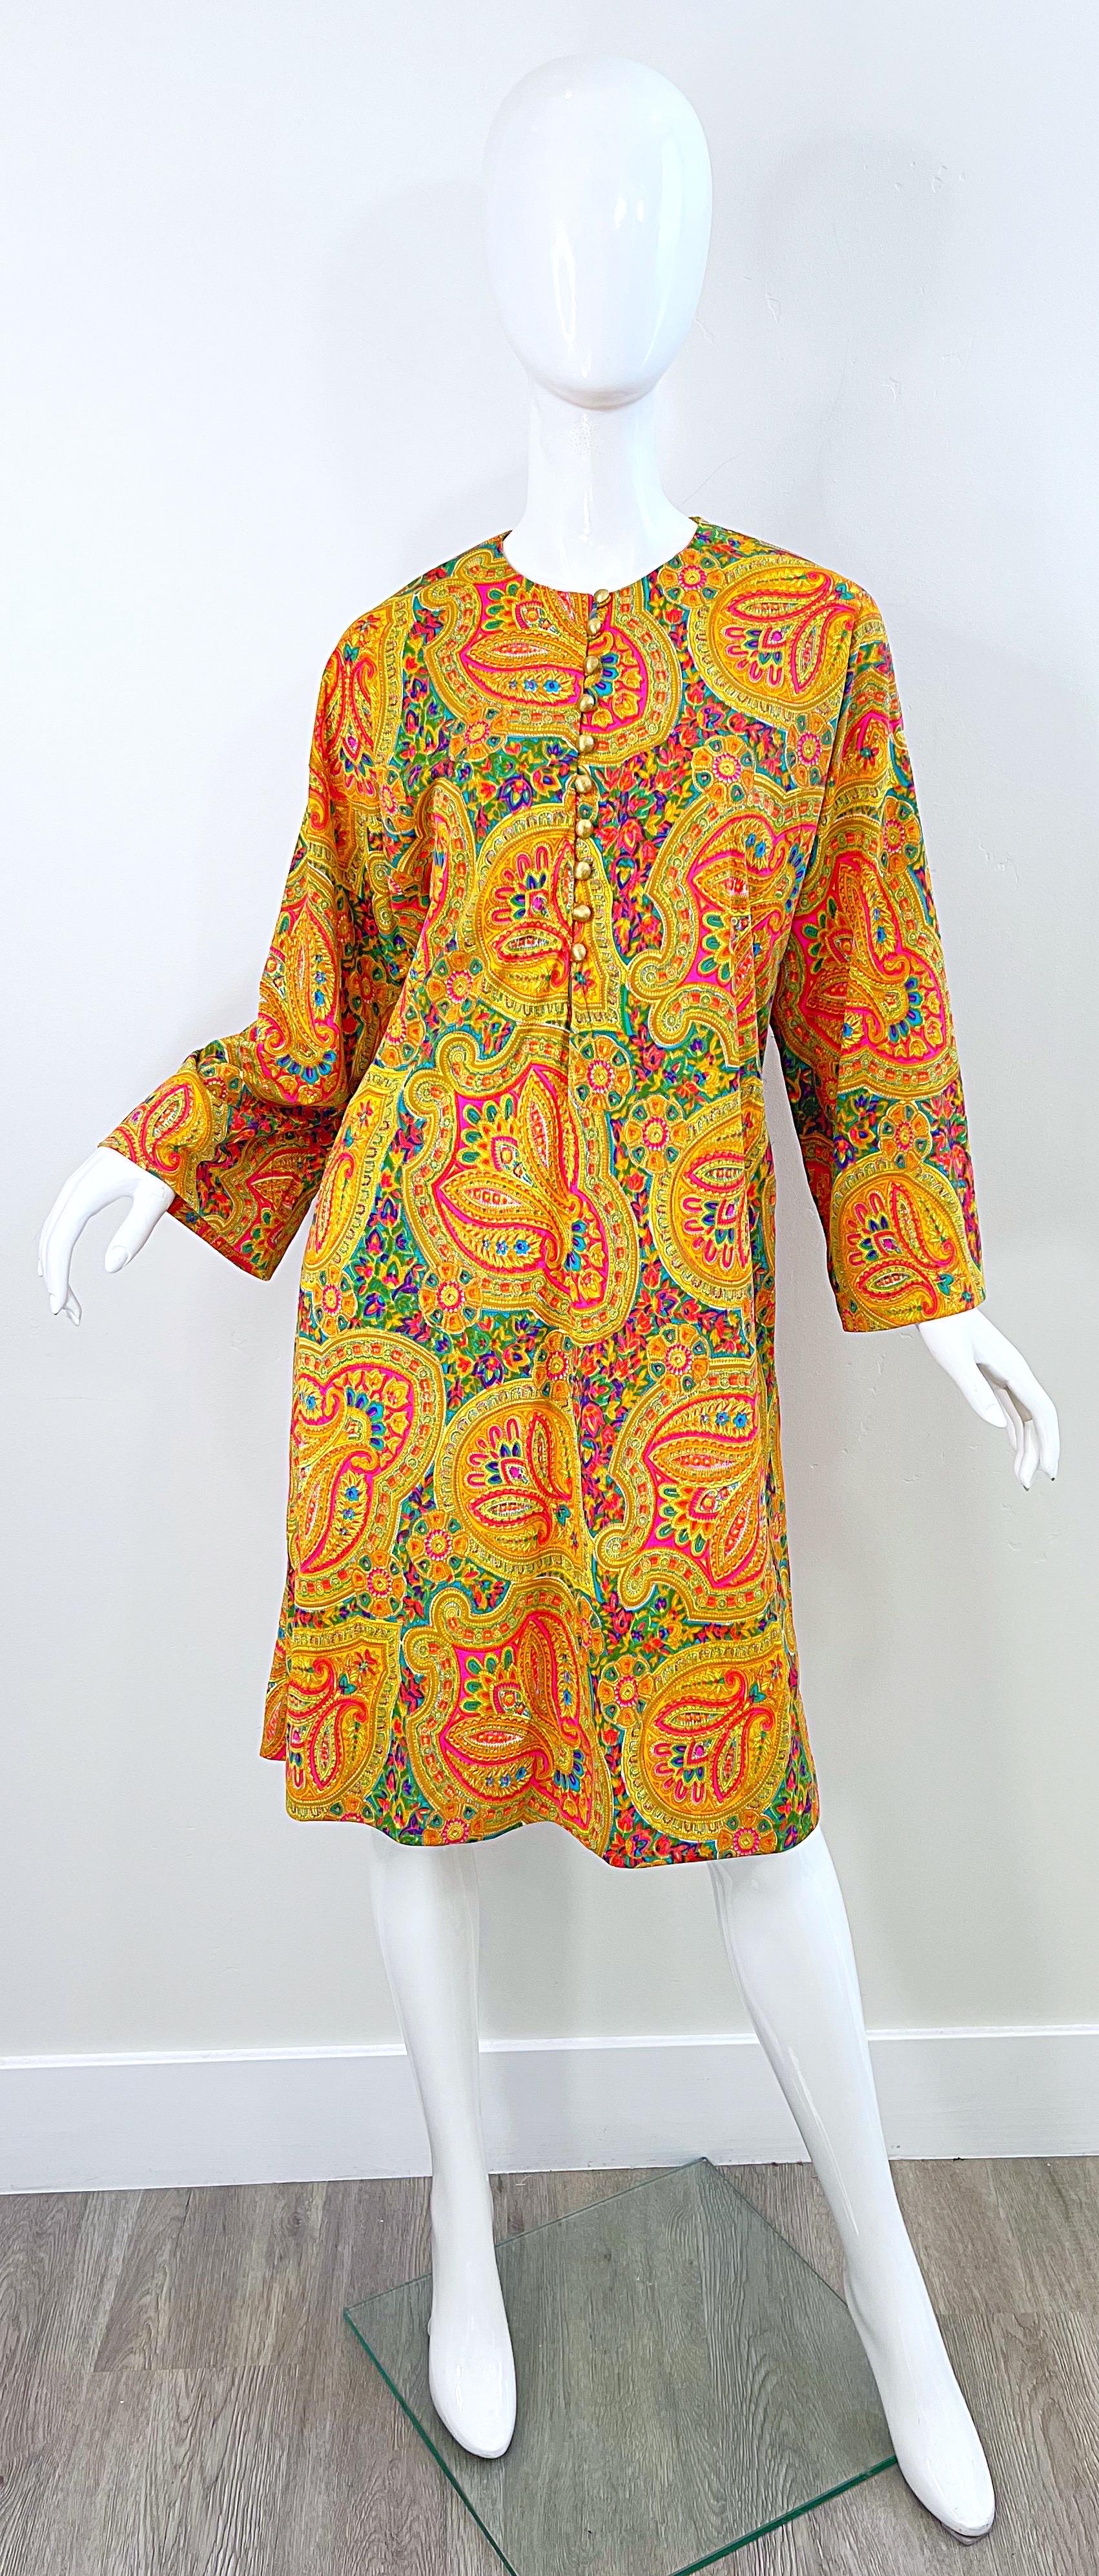 Incredible vintage 70s colorful nylon paisley print long sleeve tunic dress and wide leg trousers ! Tunic simply slips over the head, and features gold etched buttons up the front.Pockets at each side of the hips. Pants have elastic waistband that